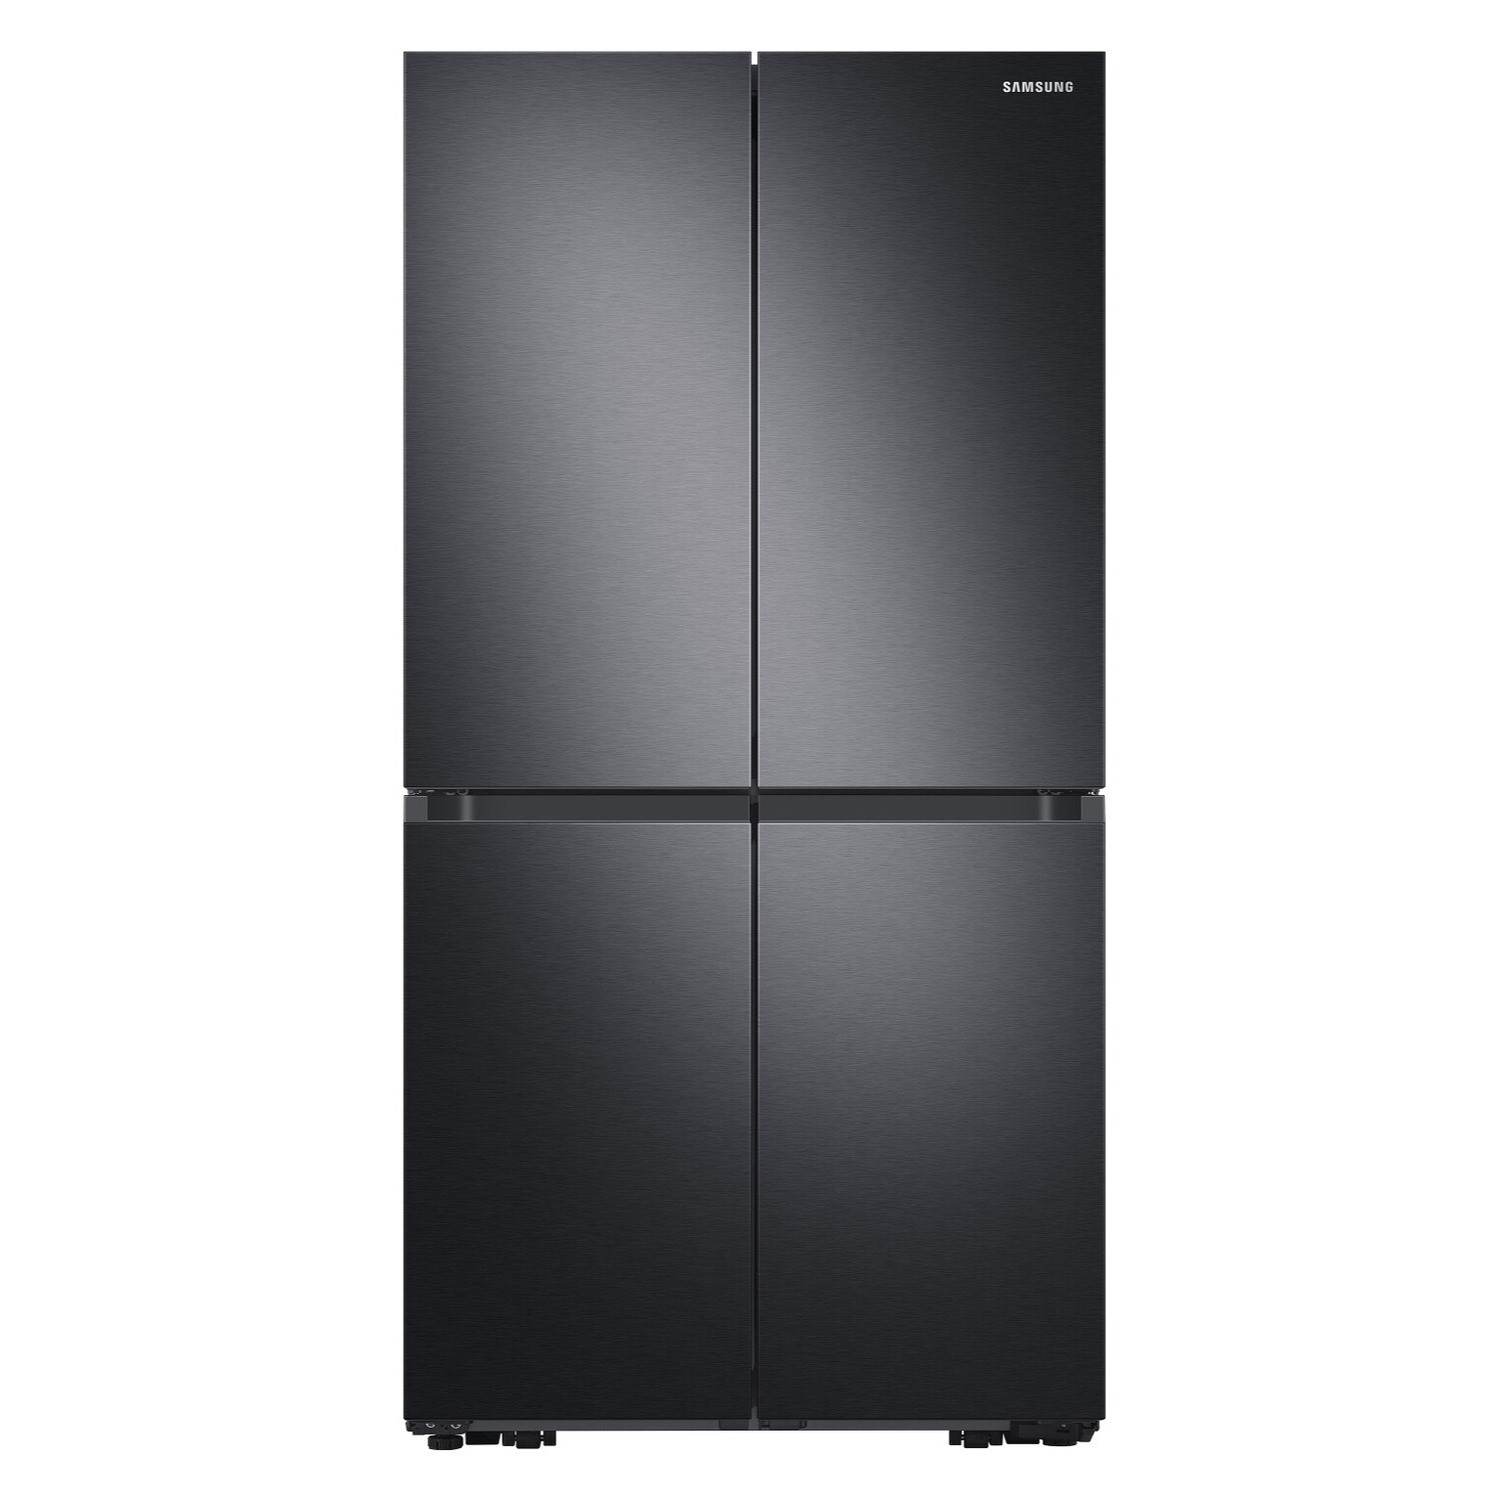 Photos - Other for Computer Samsung 647 Litre French Style Fridge Freezer with Beverage Center - B RF6 